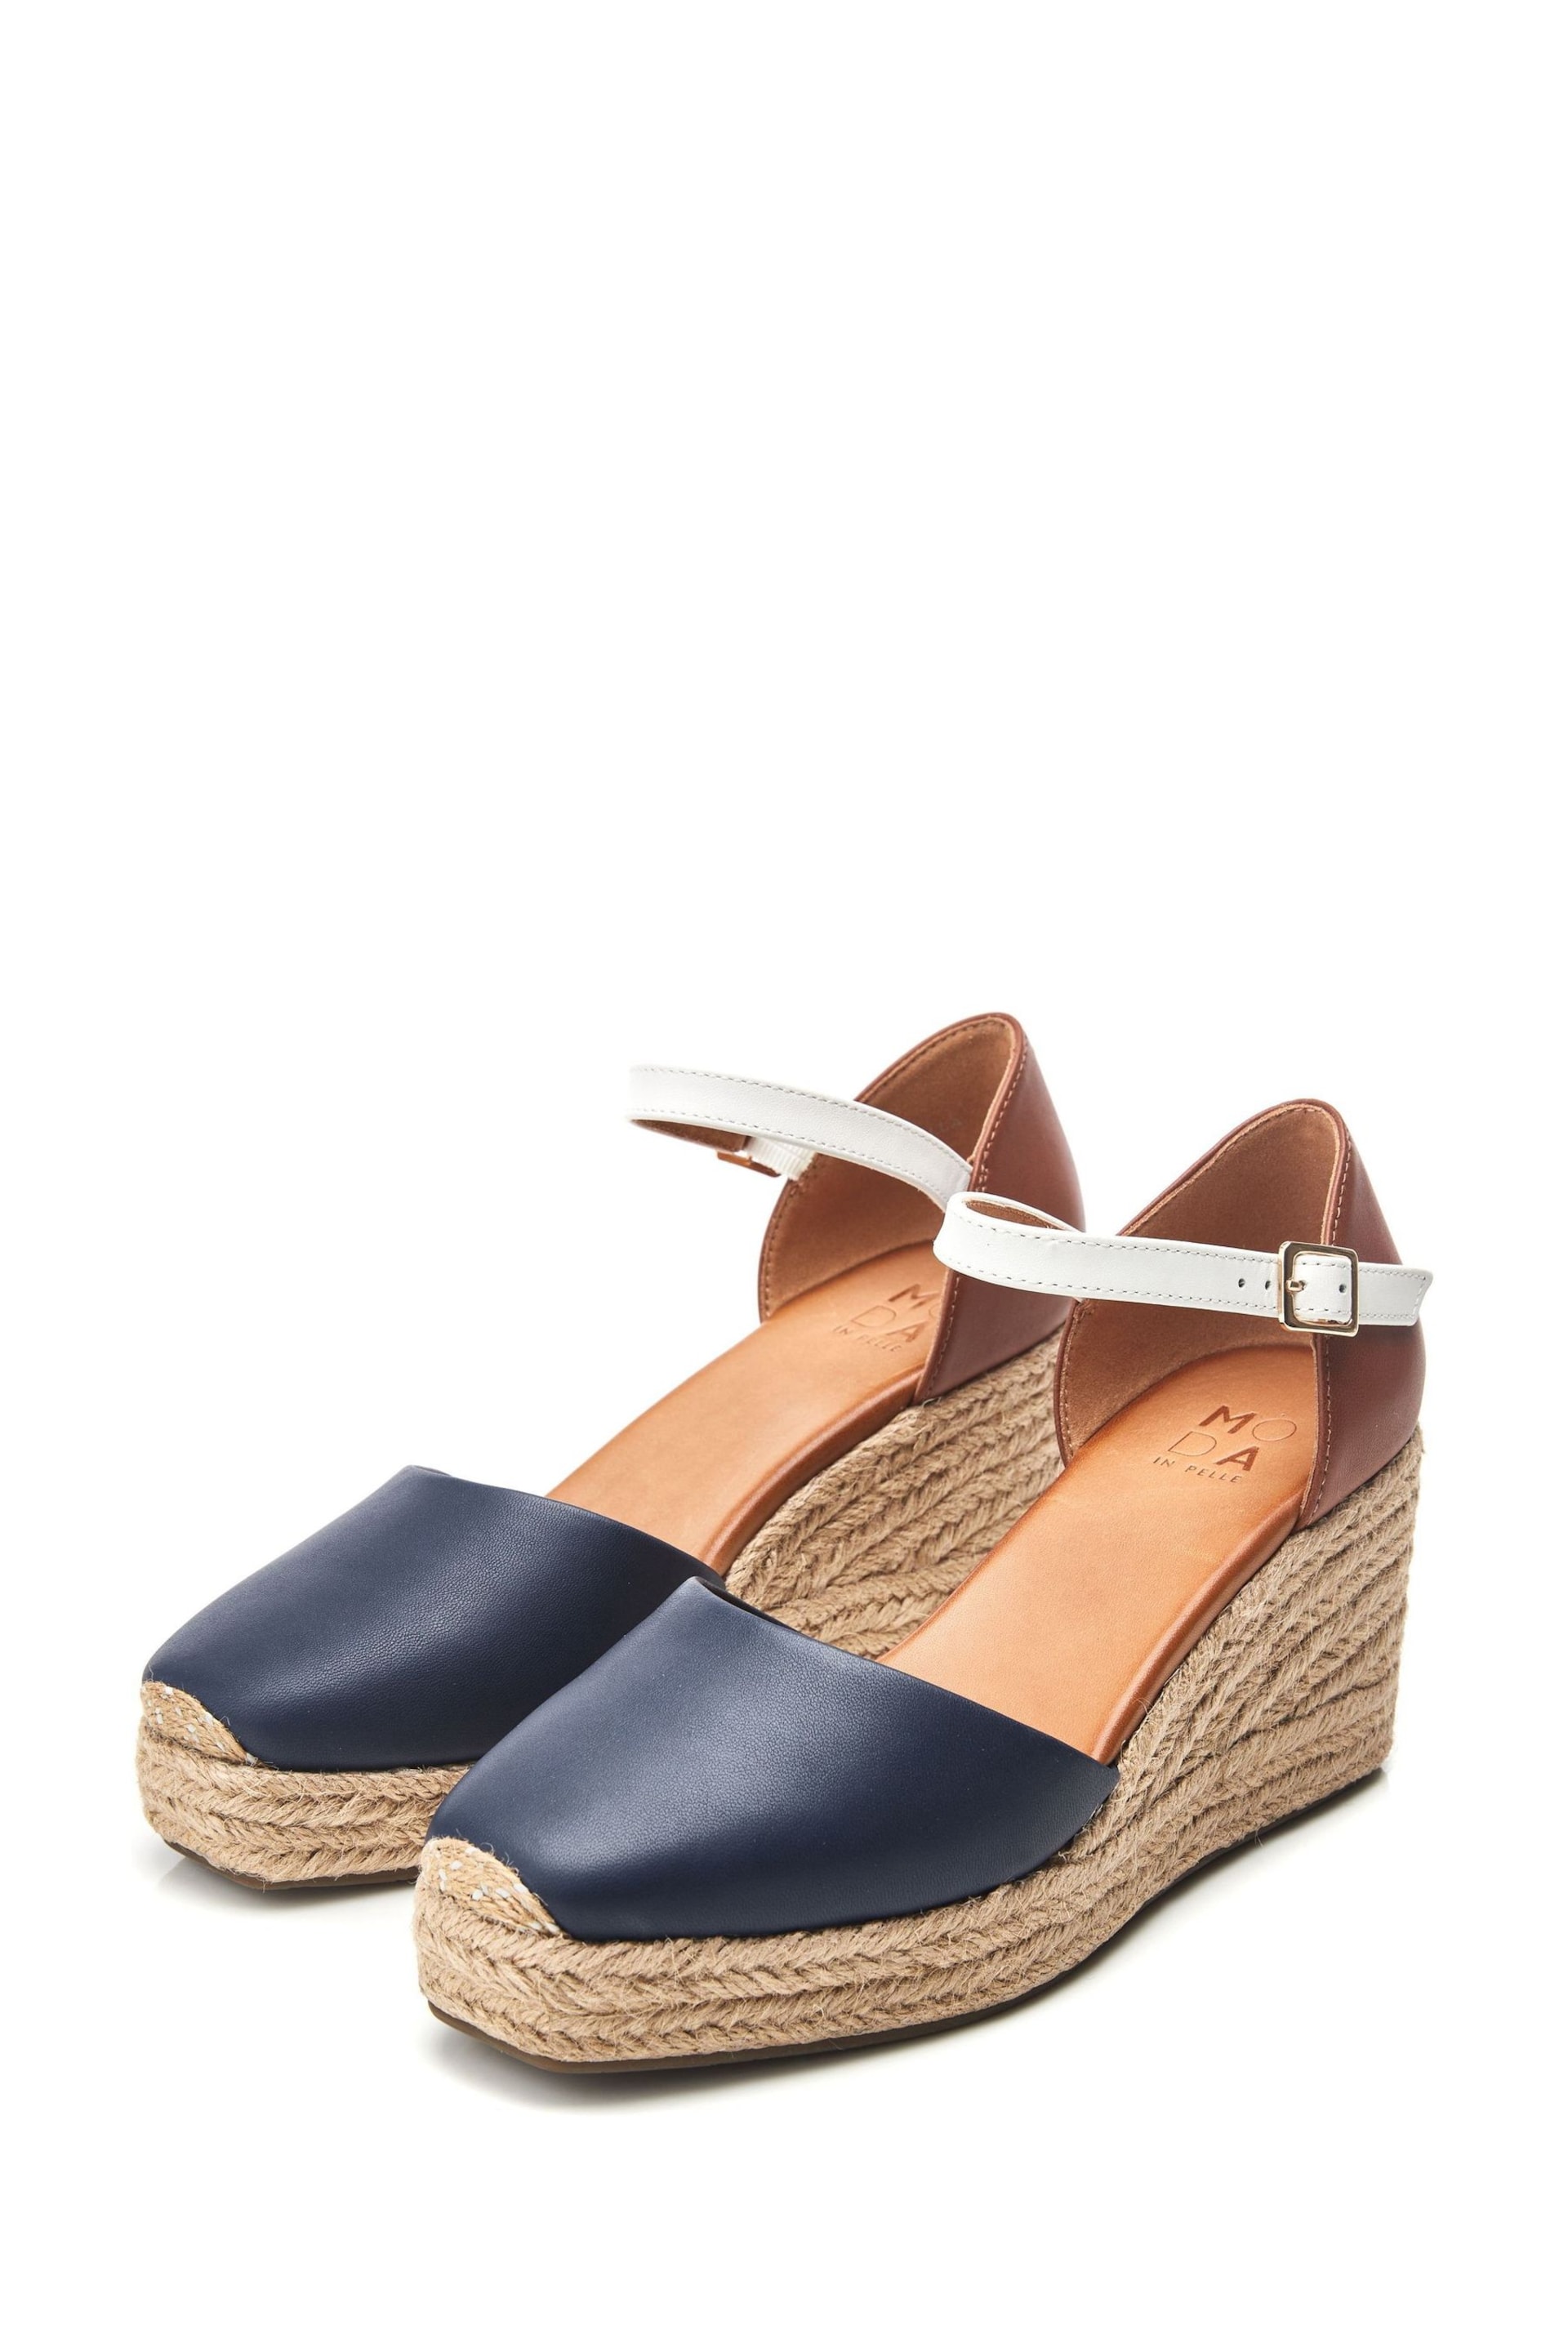 Moda in Pelle Gialla Square Toe Espadrille Wedges - Image 2 of 4